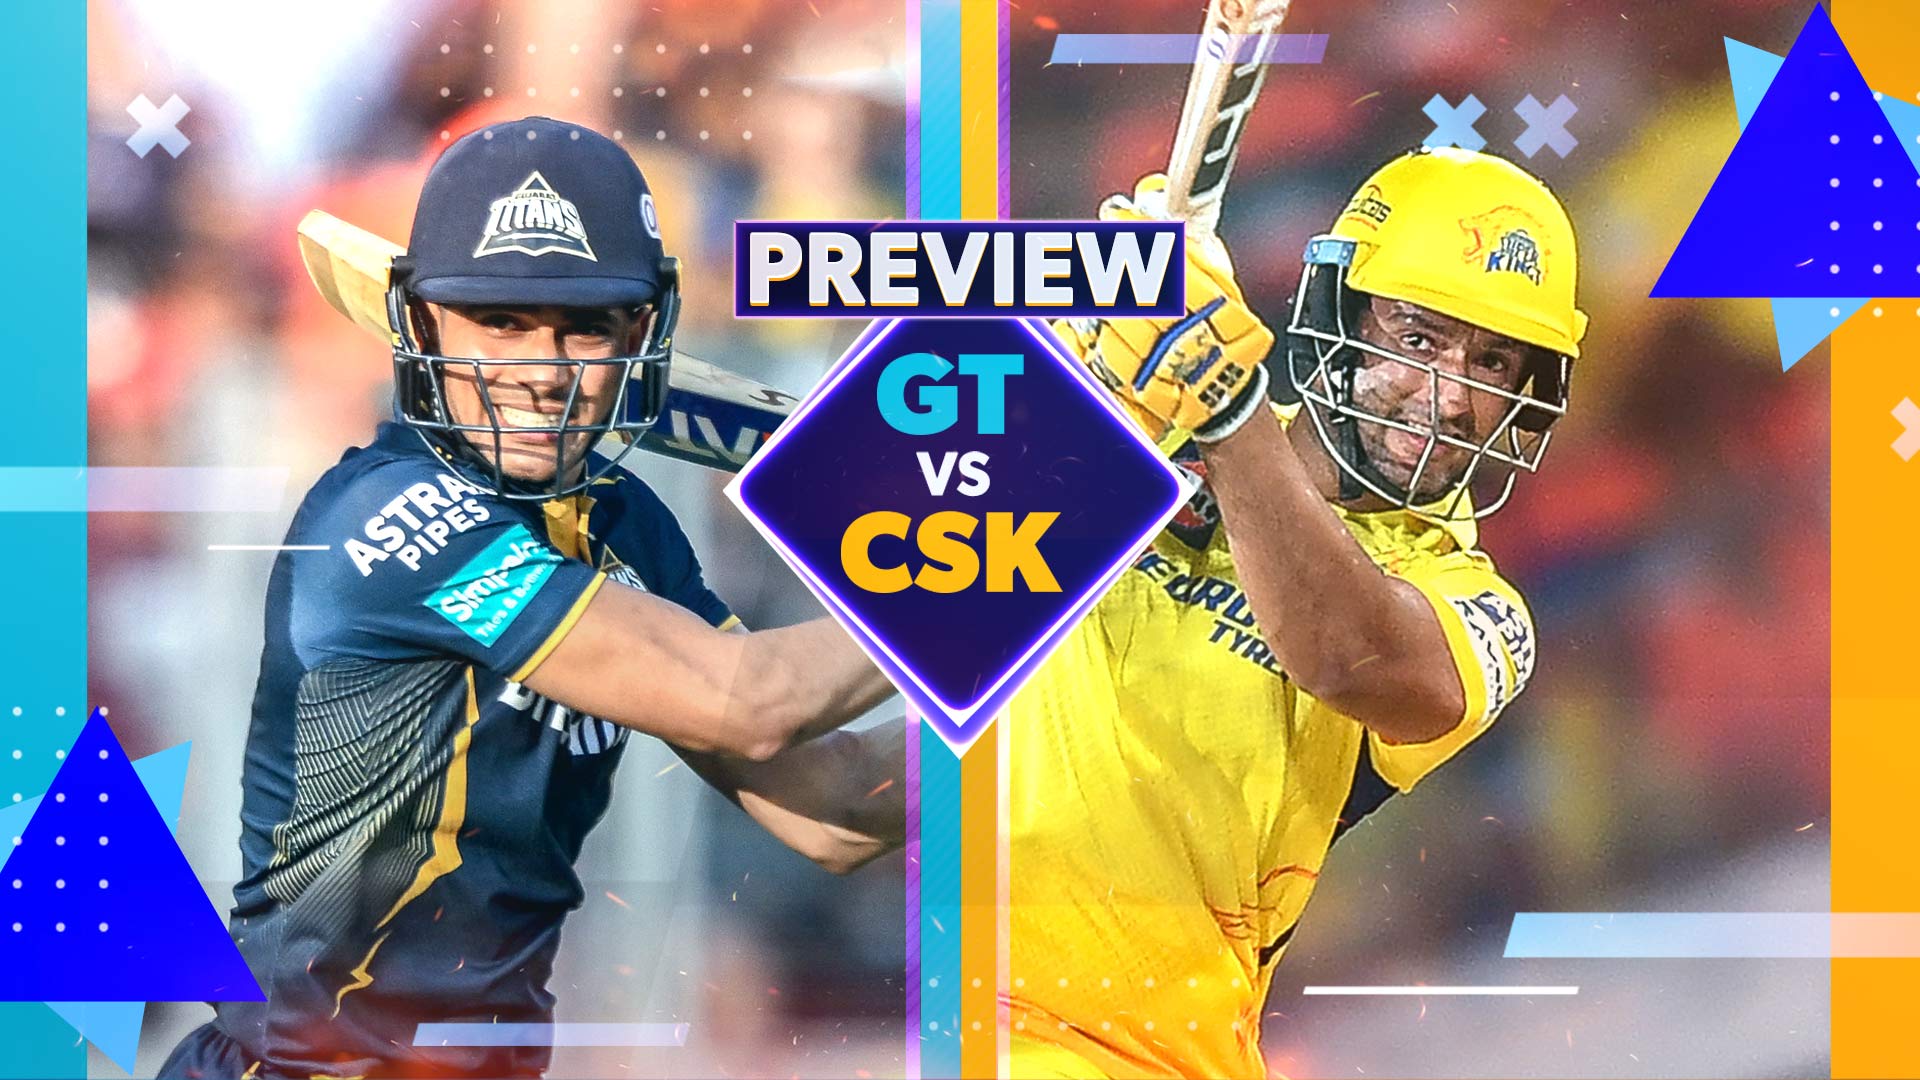 GT vs CSK: All You Need to Know